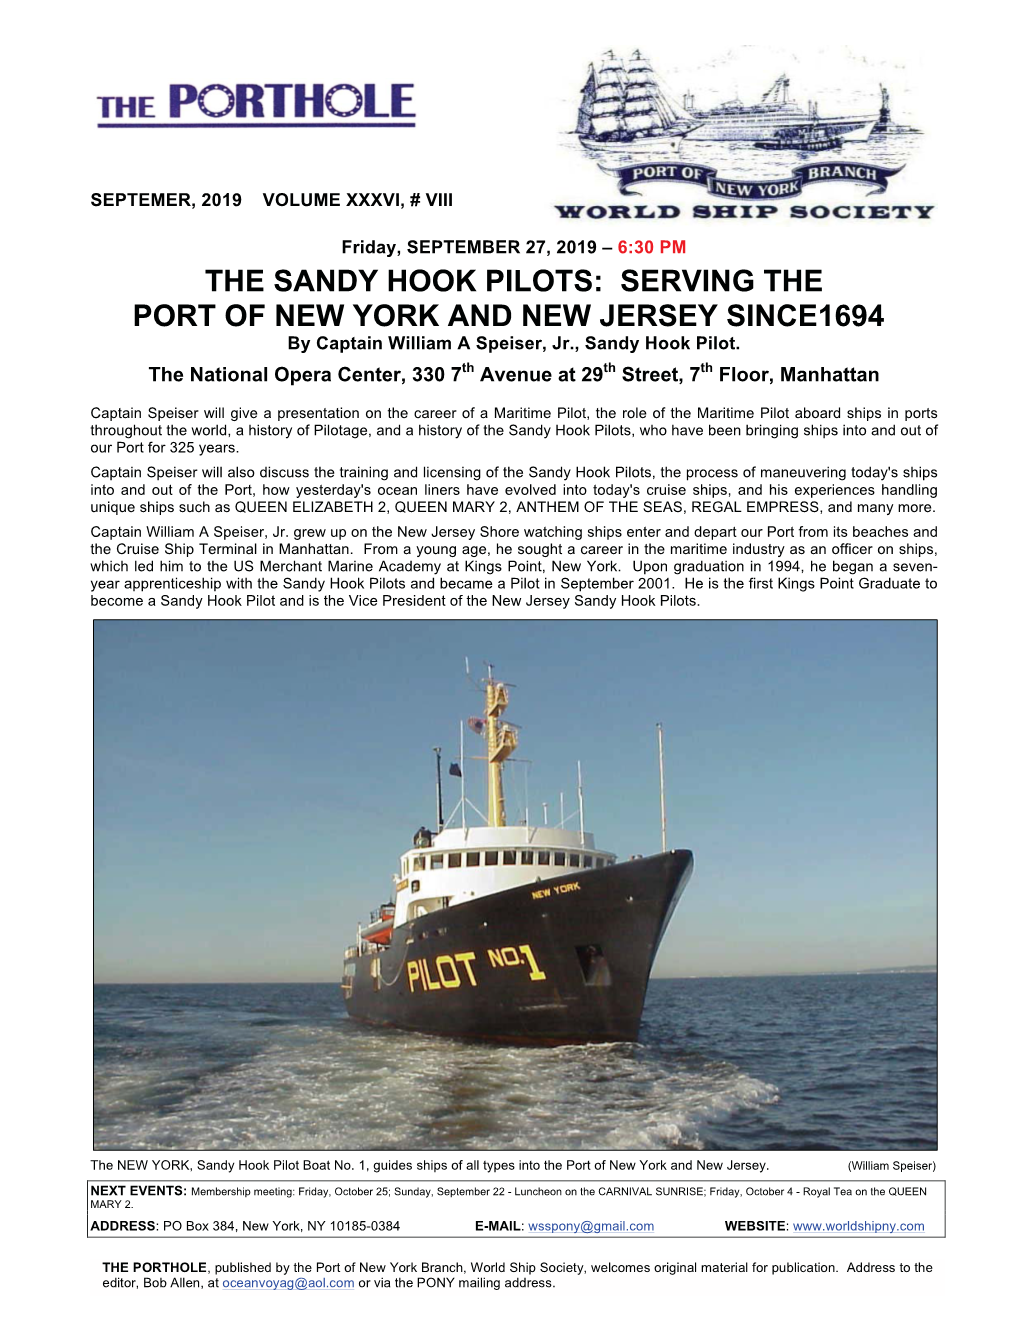 THE SANDY HOOK PILOTS: SERVING the PORT of NEW YORK and NEW JERSEY SINCE1694 by Captain William a Speiser, Jr., Sandy Hook Pilot